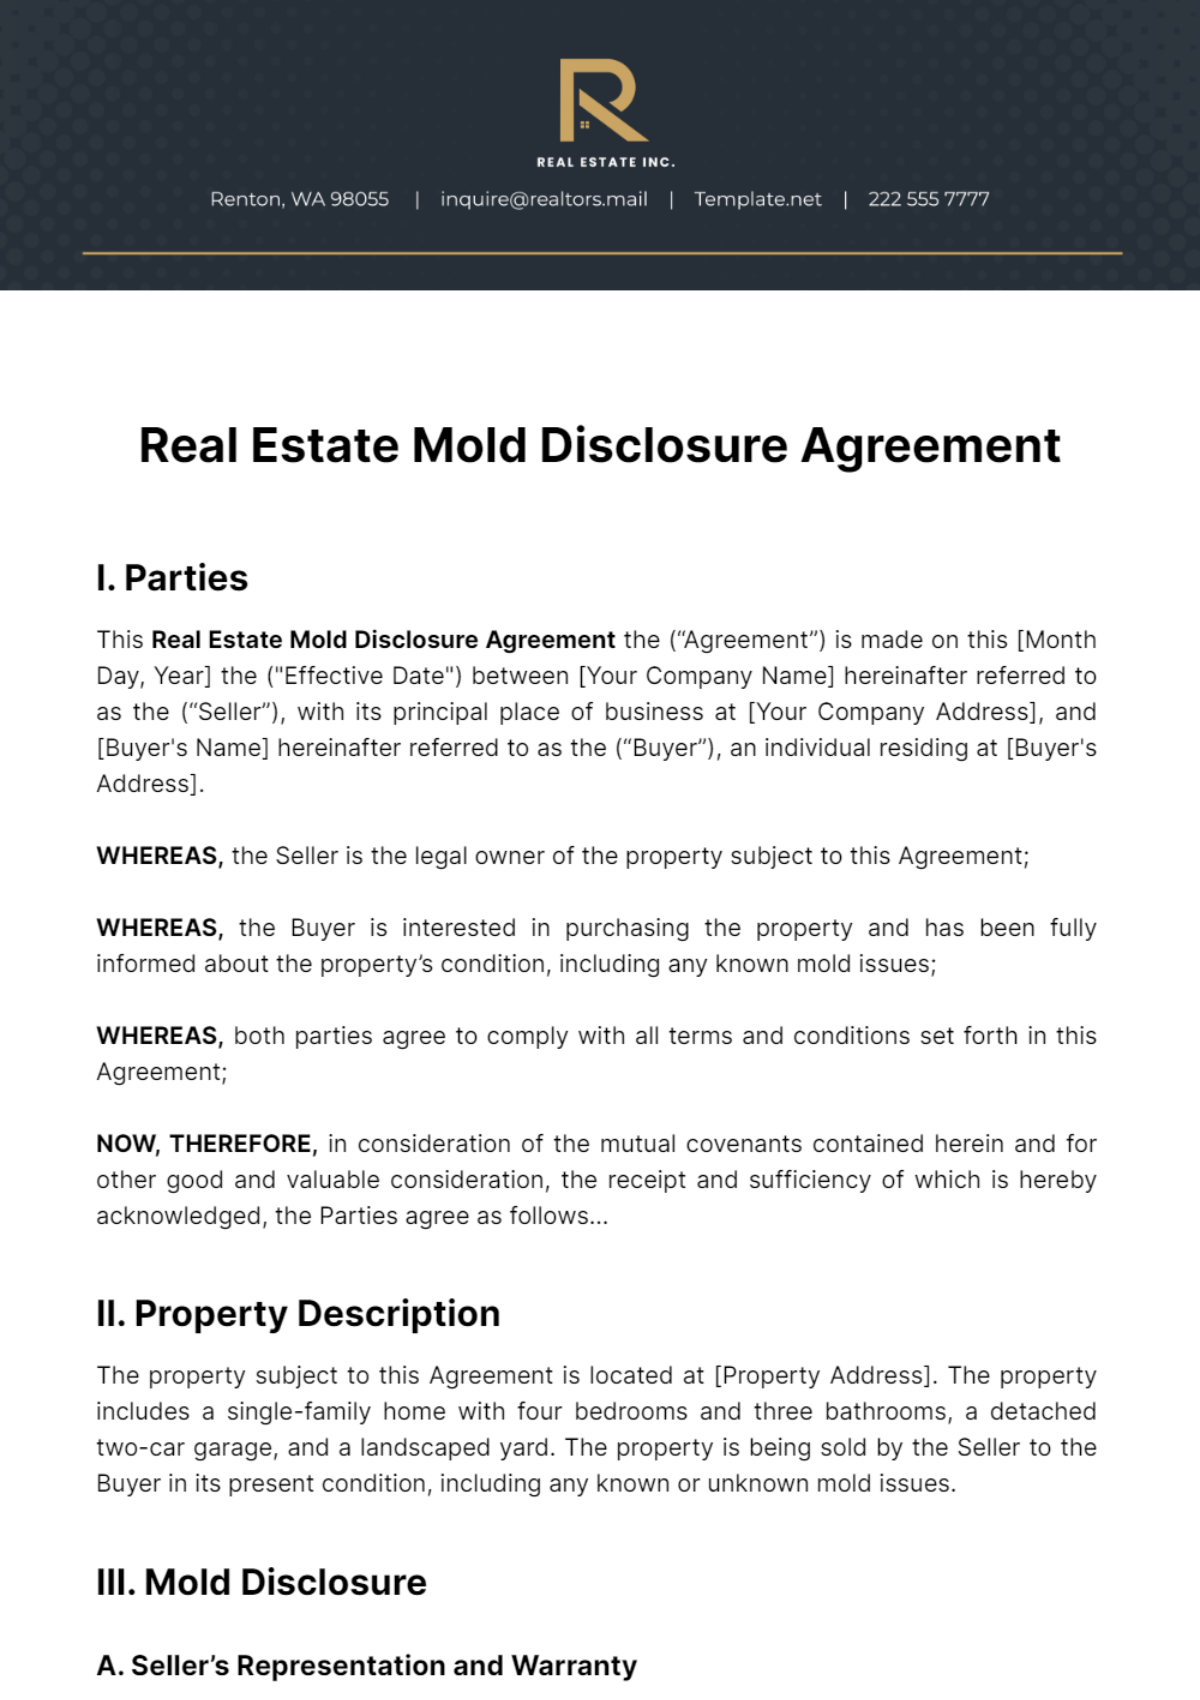 Real Estate Mold Disclosure Agreement Template